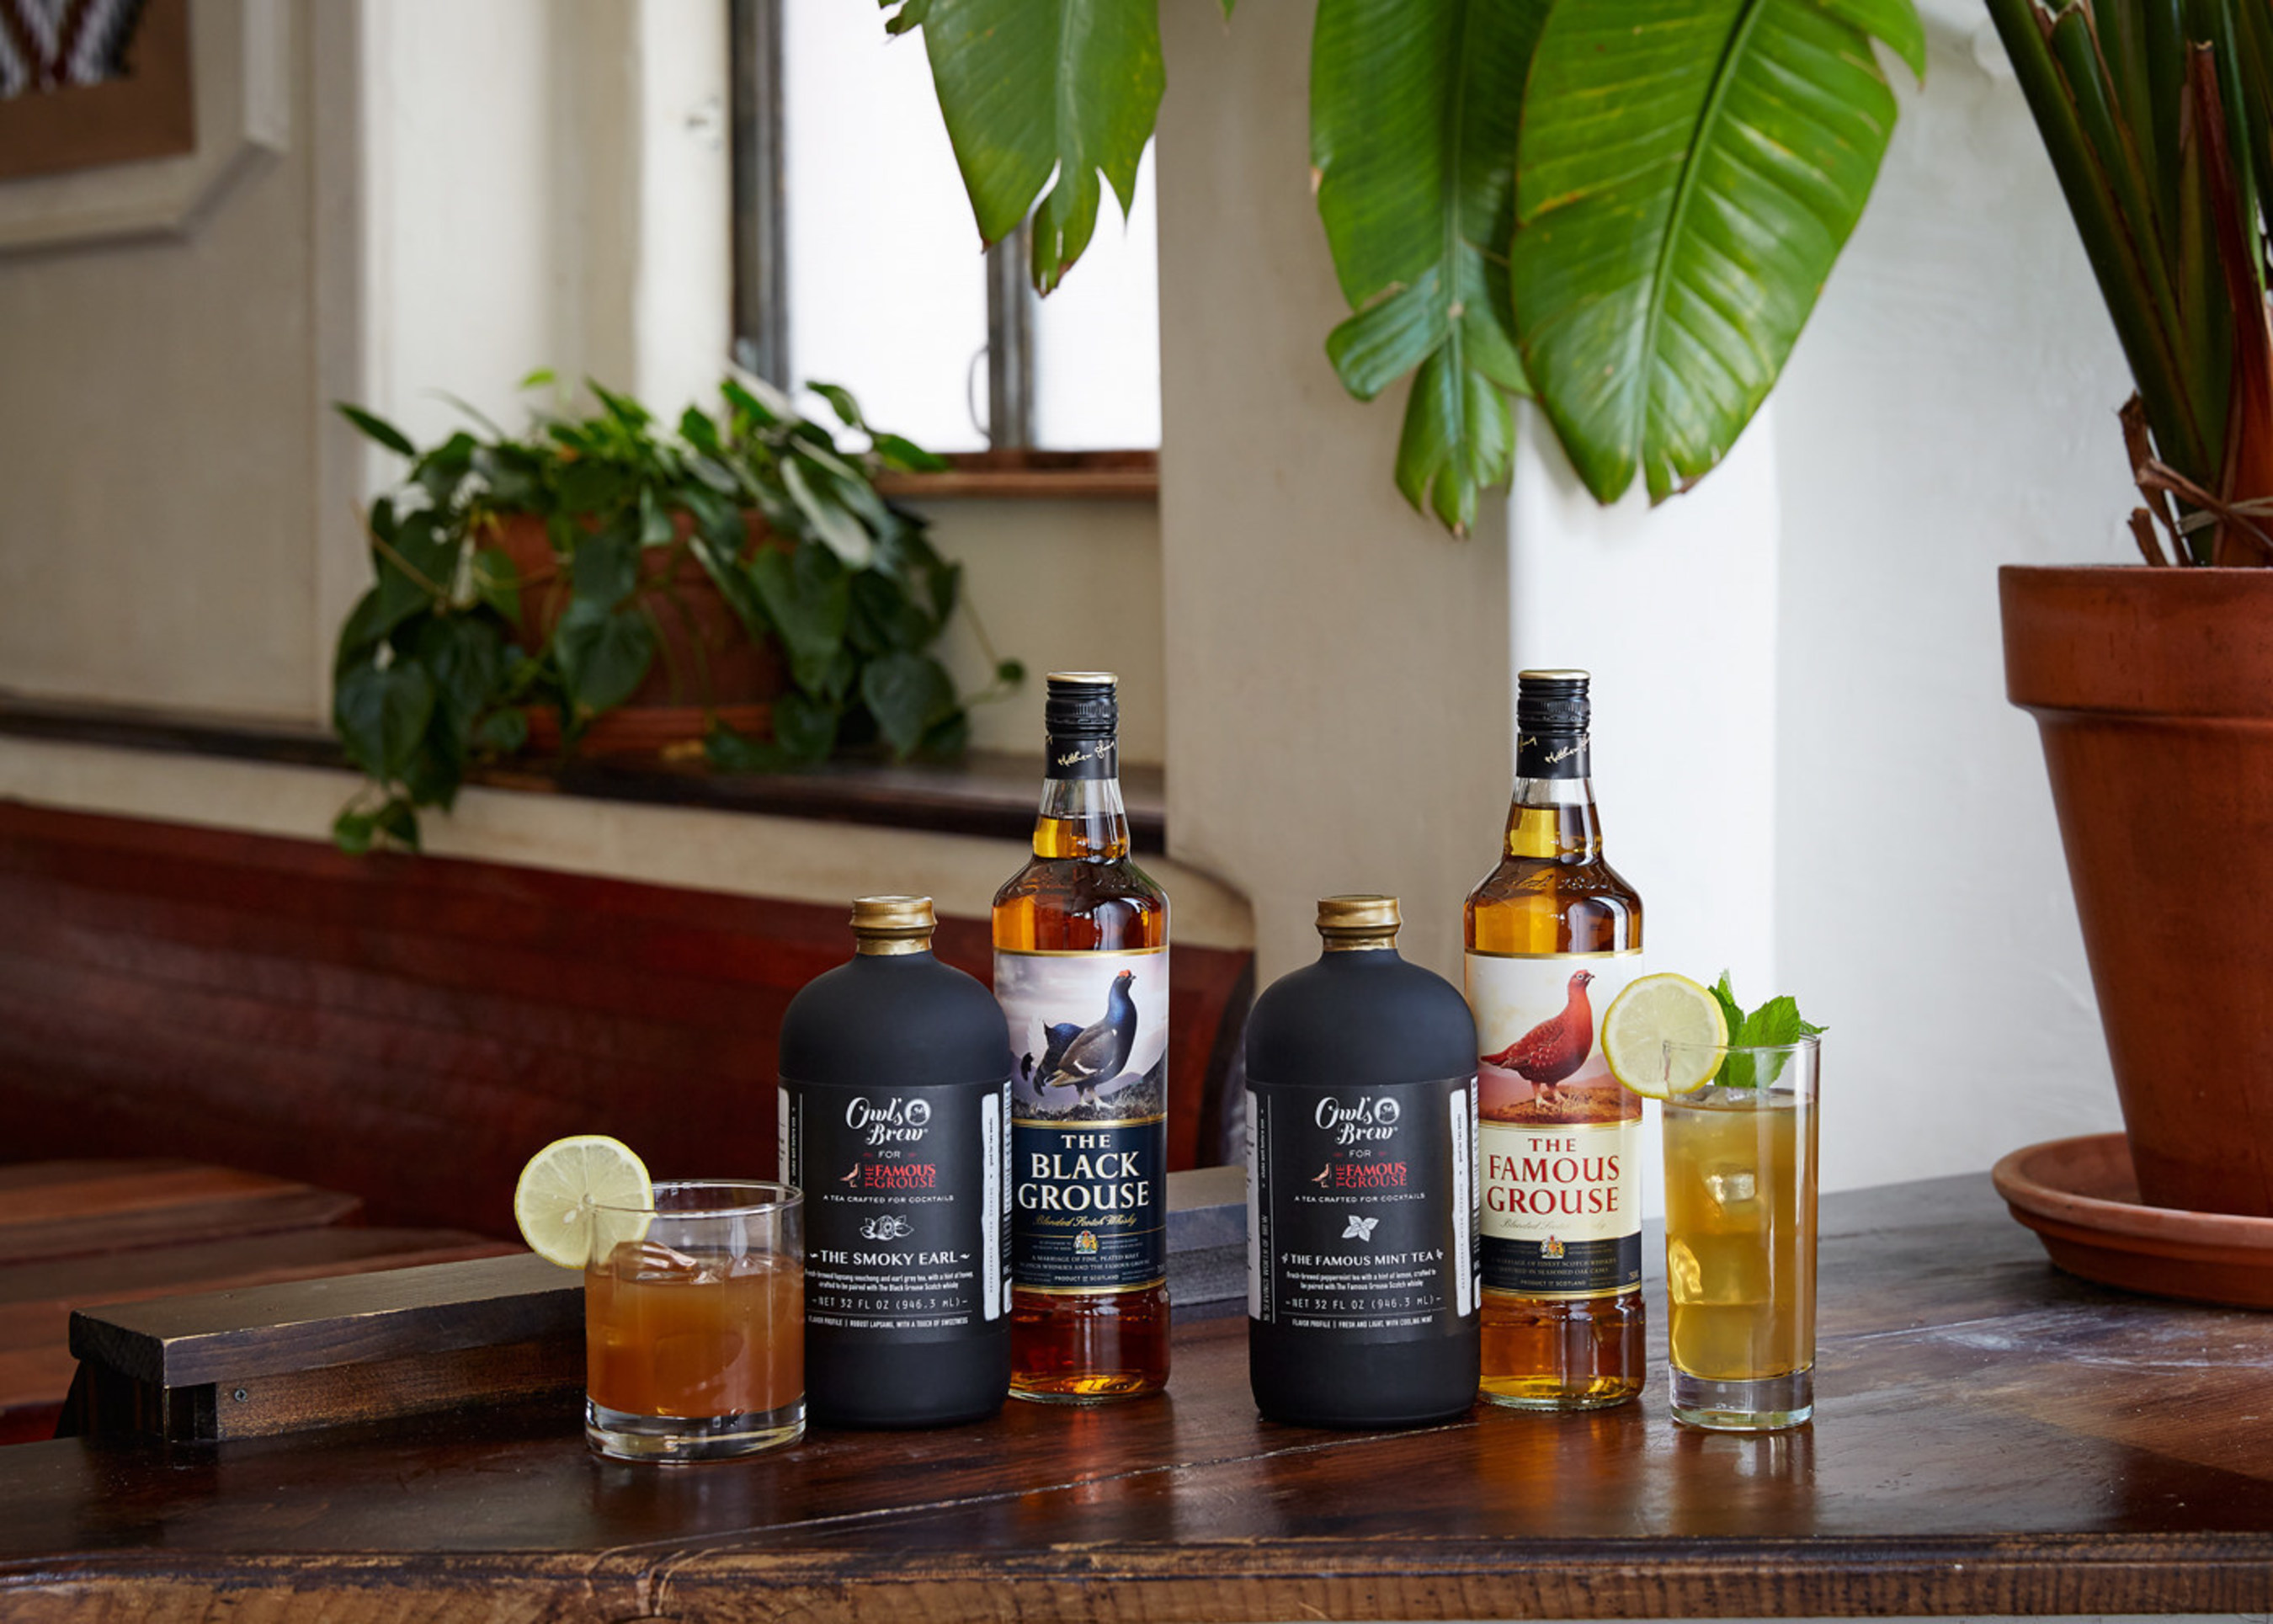 The Famous Grouse, Scotland's no. 1 Scotch, and The Owl's Brew, the first-ever tea crafted for cocktails developed two new exceptional tea blends: The Famous Mint Tea, designed to be paired with The Famous Grouse and The Smoky Earl, created to complement The Black Grouse.